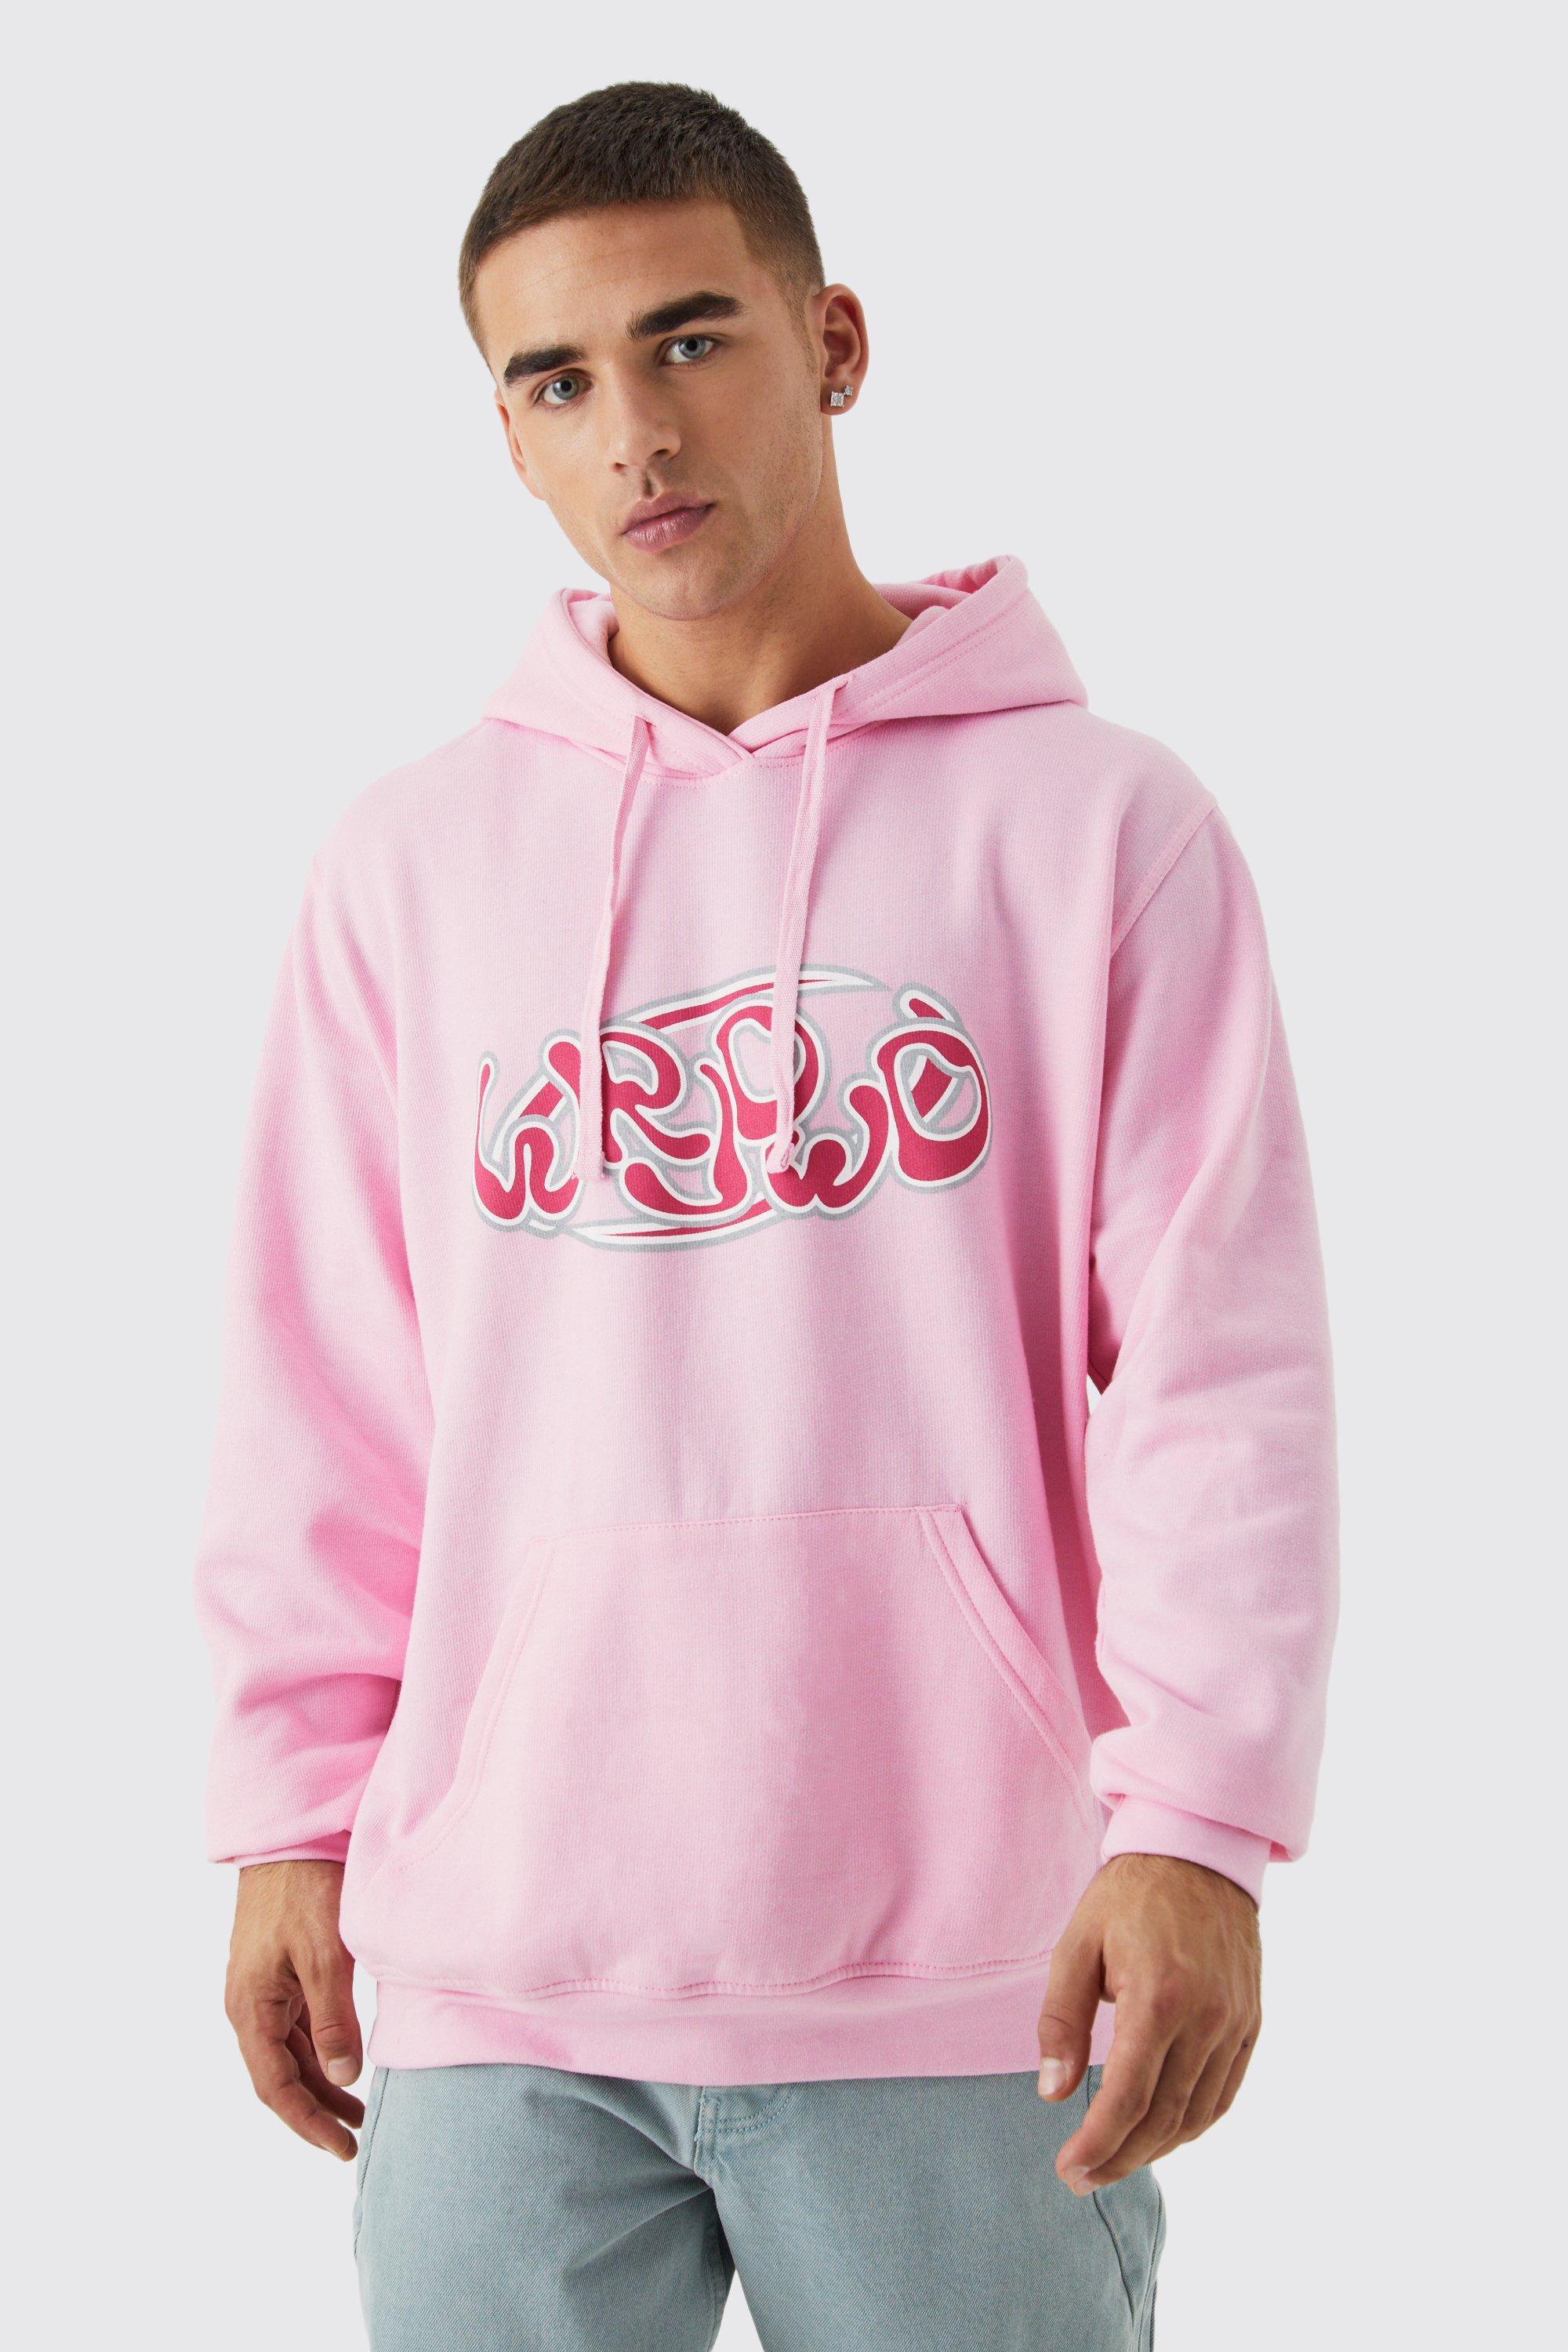 mens pink oversized bubble graphic hoodie, pink